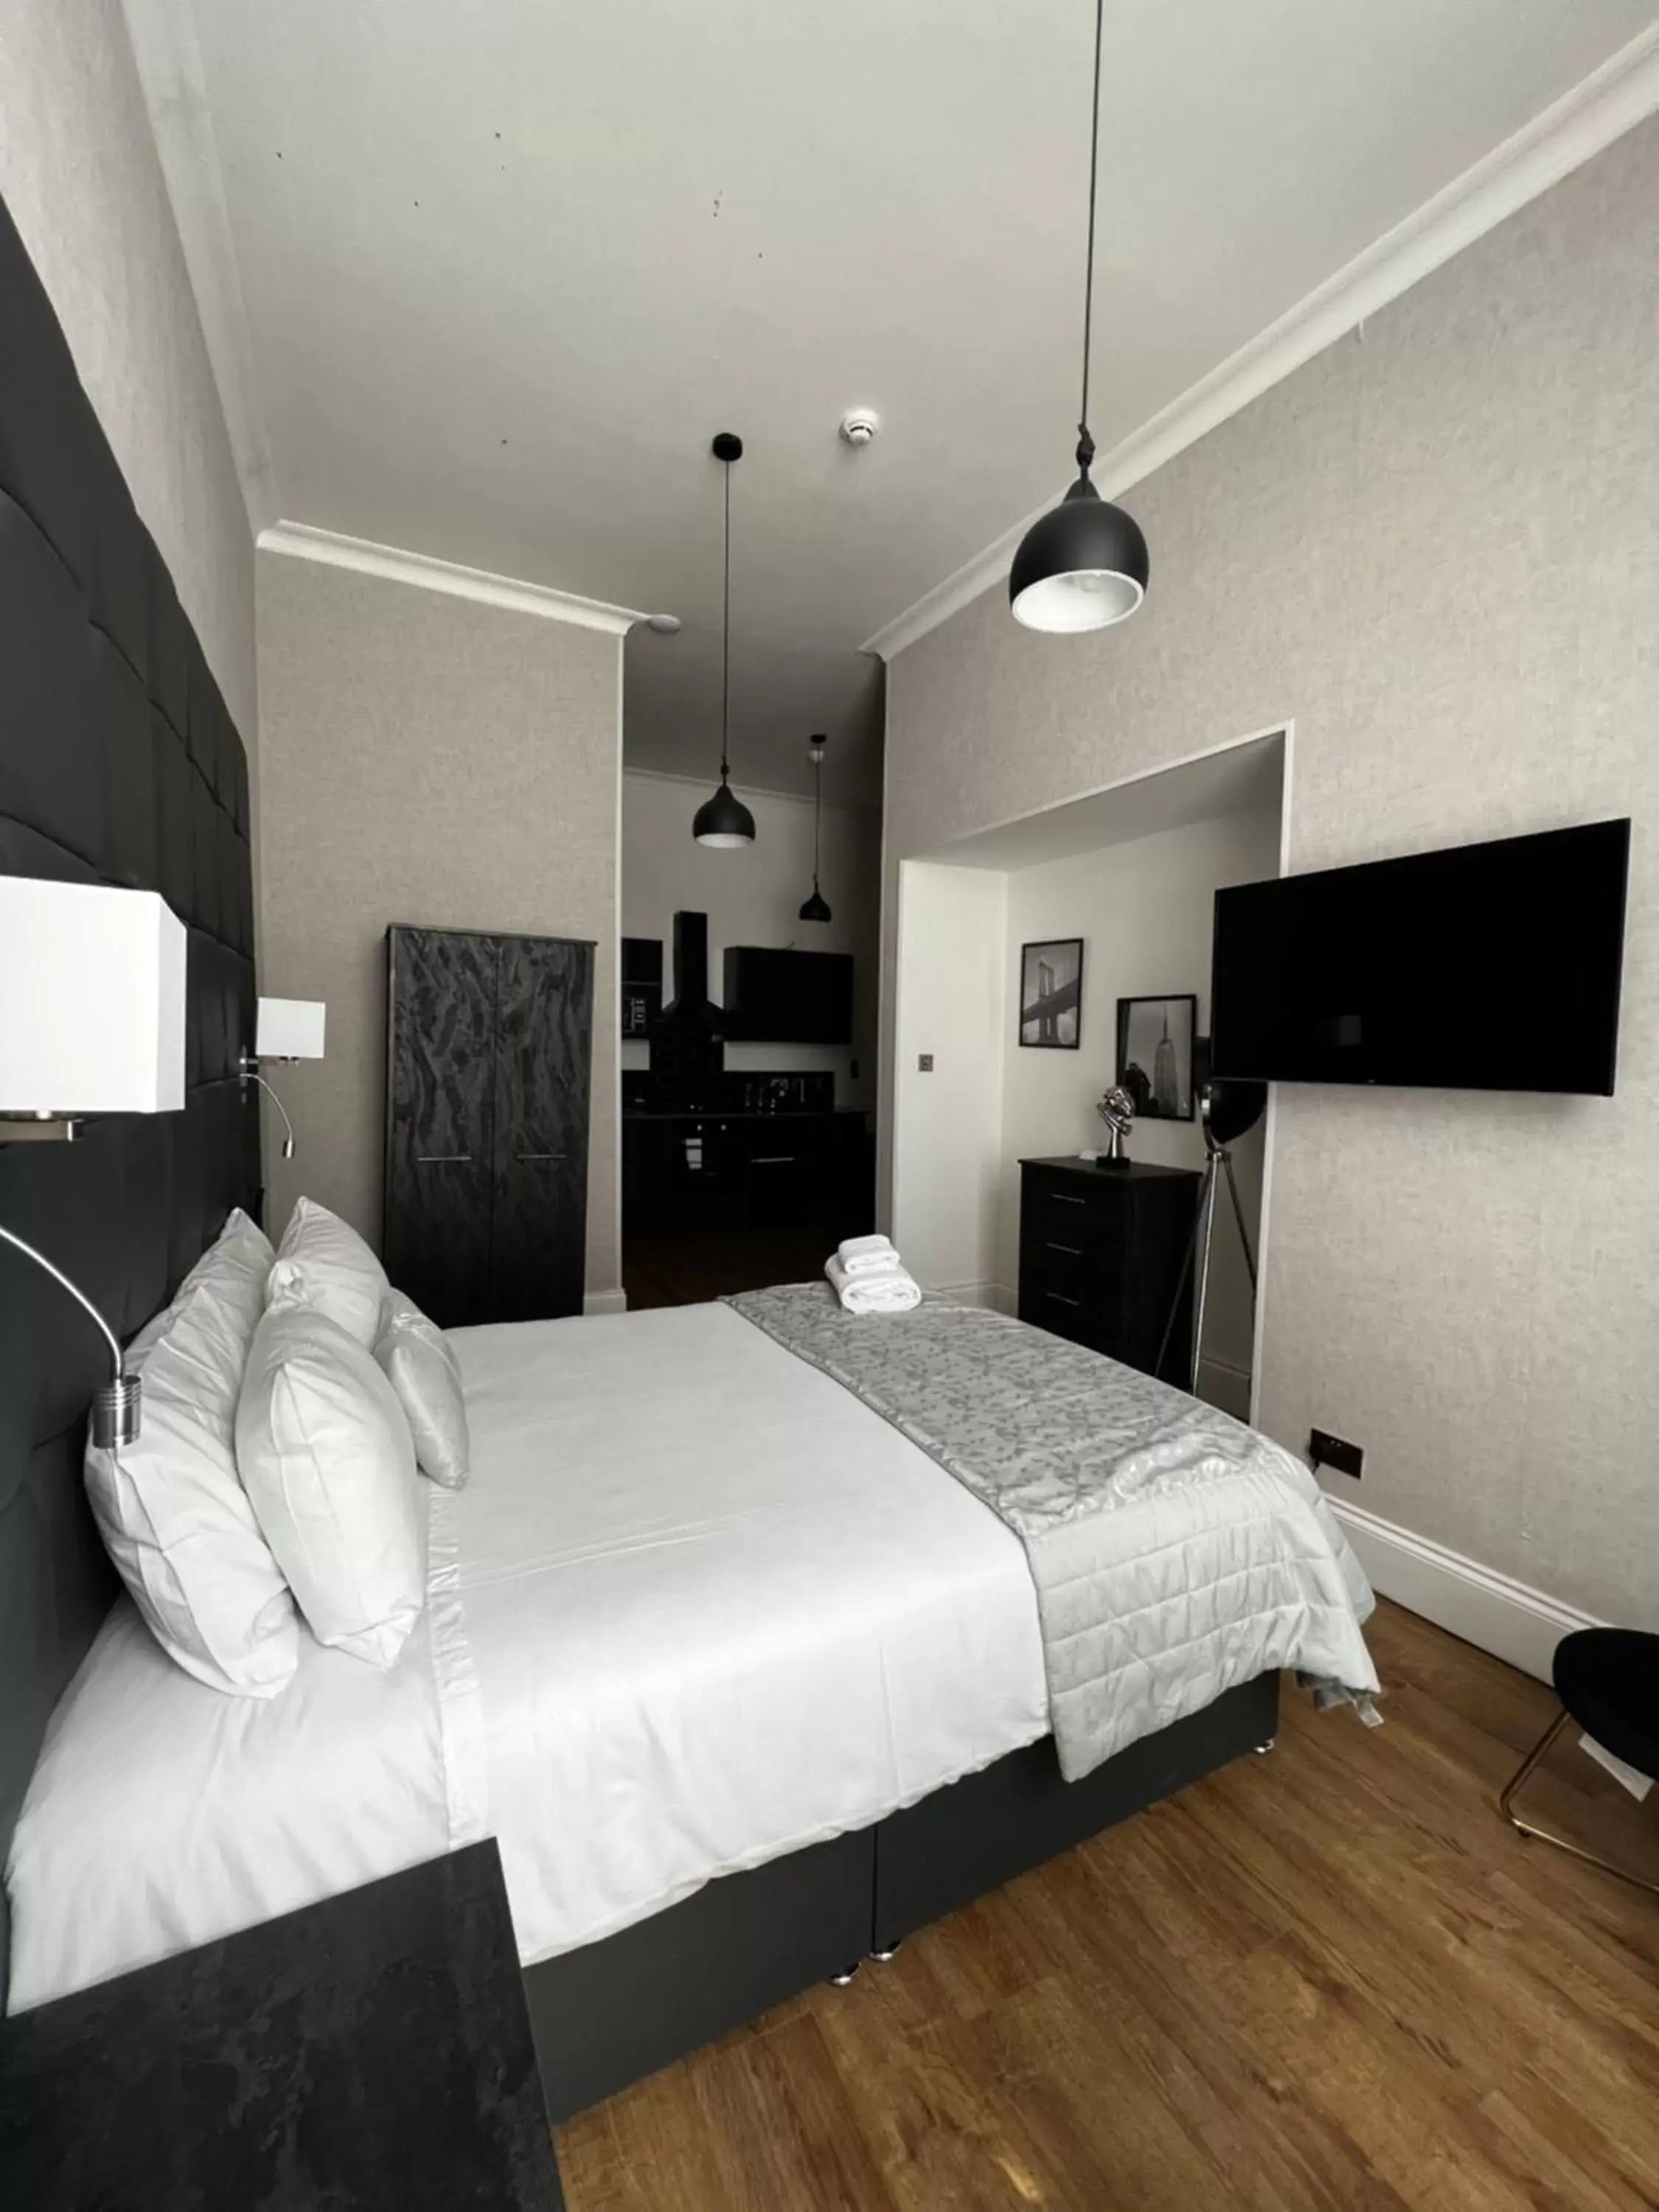 Bed in Amani Apartments - Glasgow City Centre